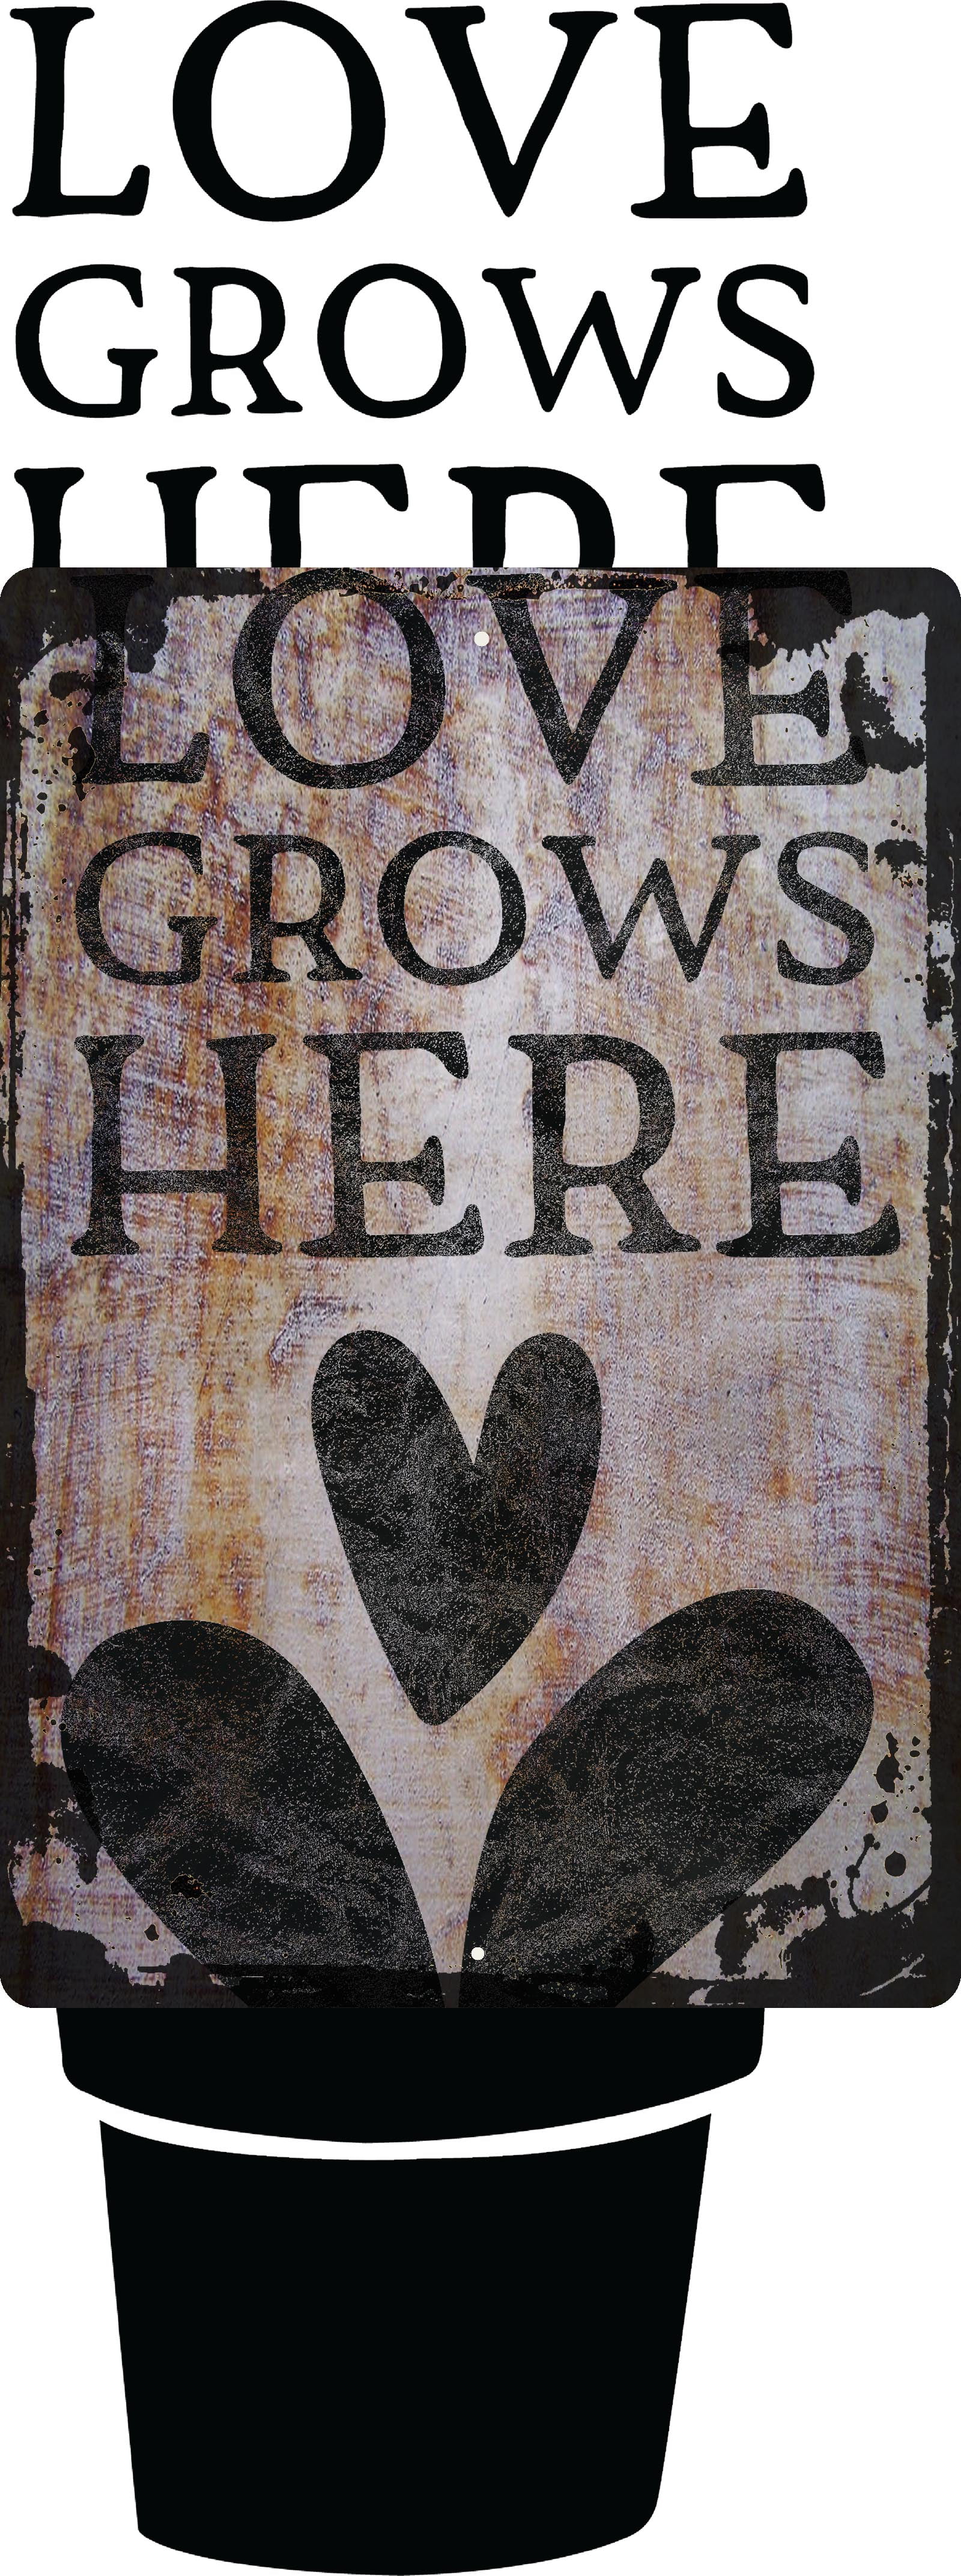 Wall Sign Love grows here caps plant flower pot garden nature water Decorative Art Wall Decor Funny Gift - image 1 of 1